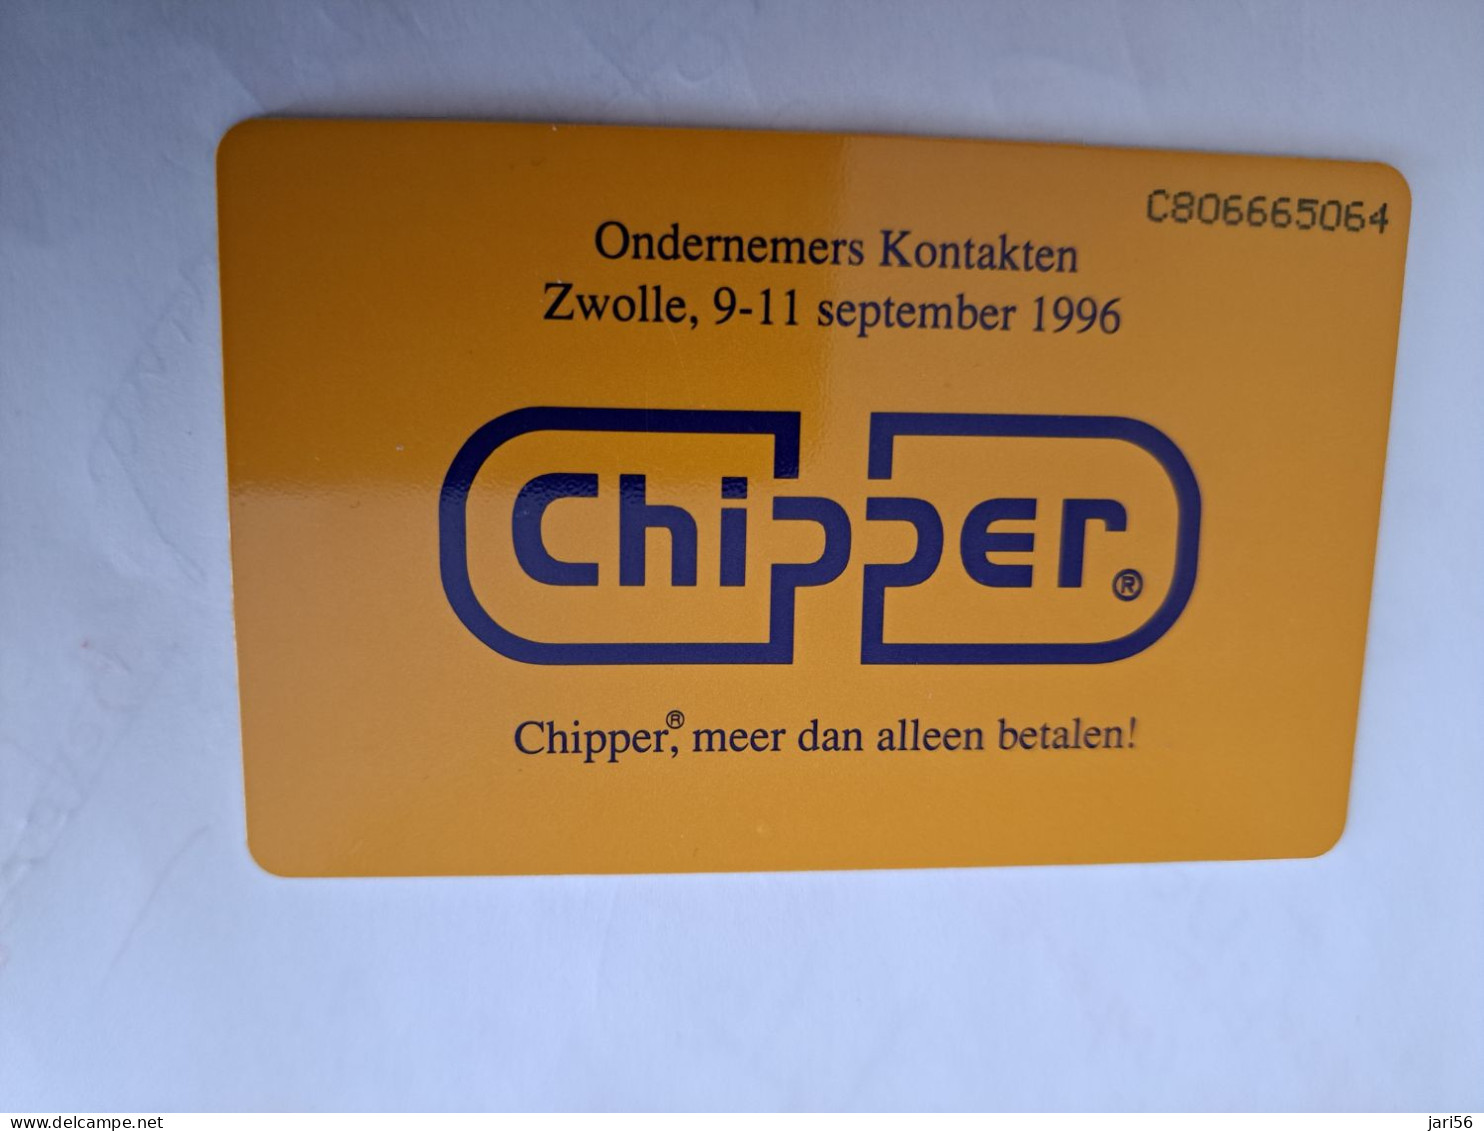 NETHERLANDS / CHIP ADVERTISING CARD/ HFL 2,50/ ING BANK ZWOLLE/ CHIPPER     /  CRD 341   /MINT /   ** 14142** - Private